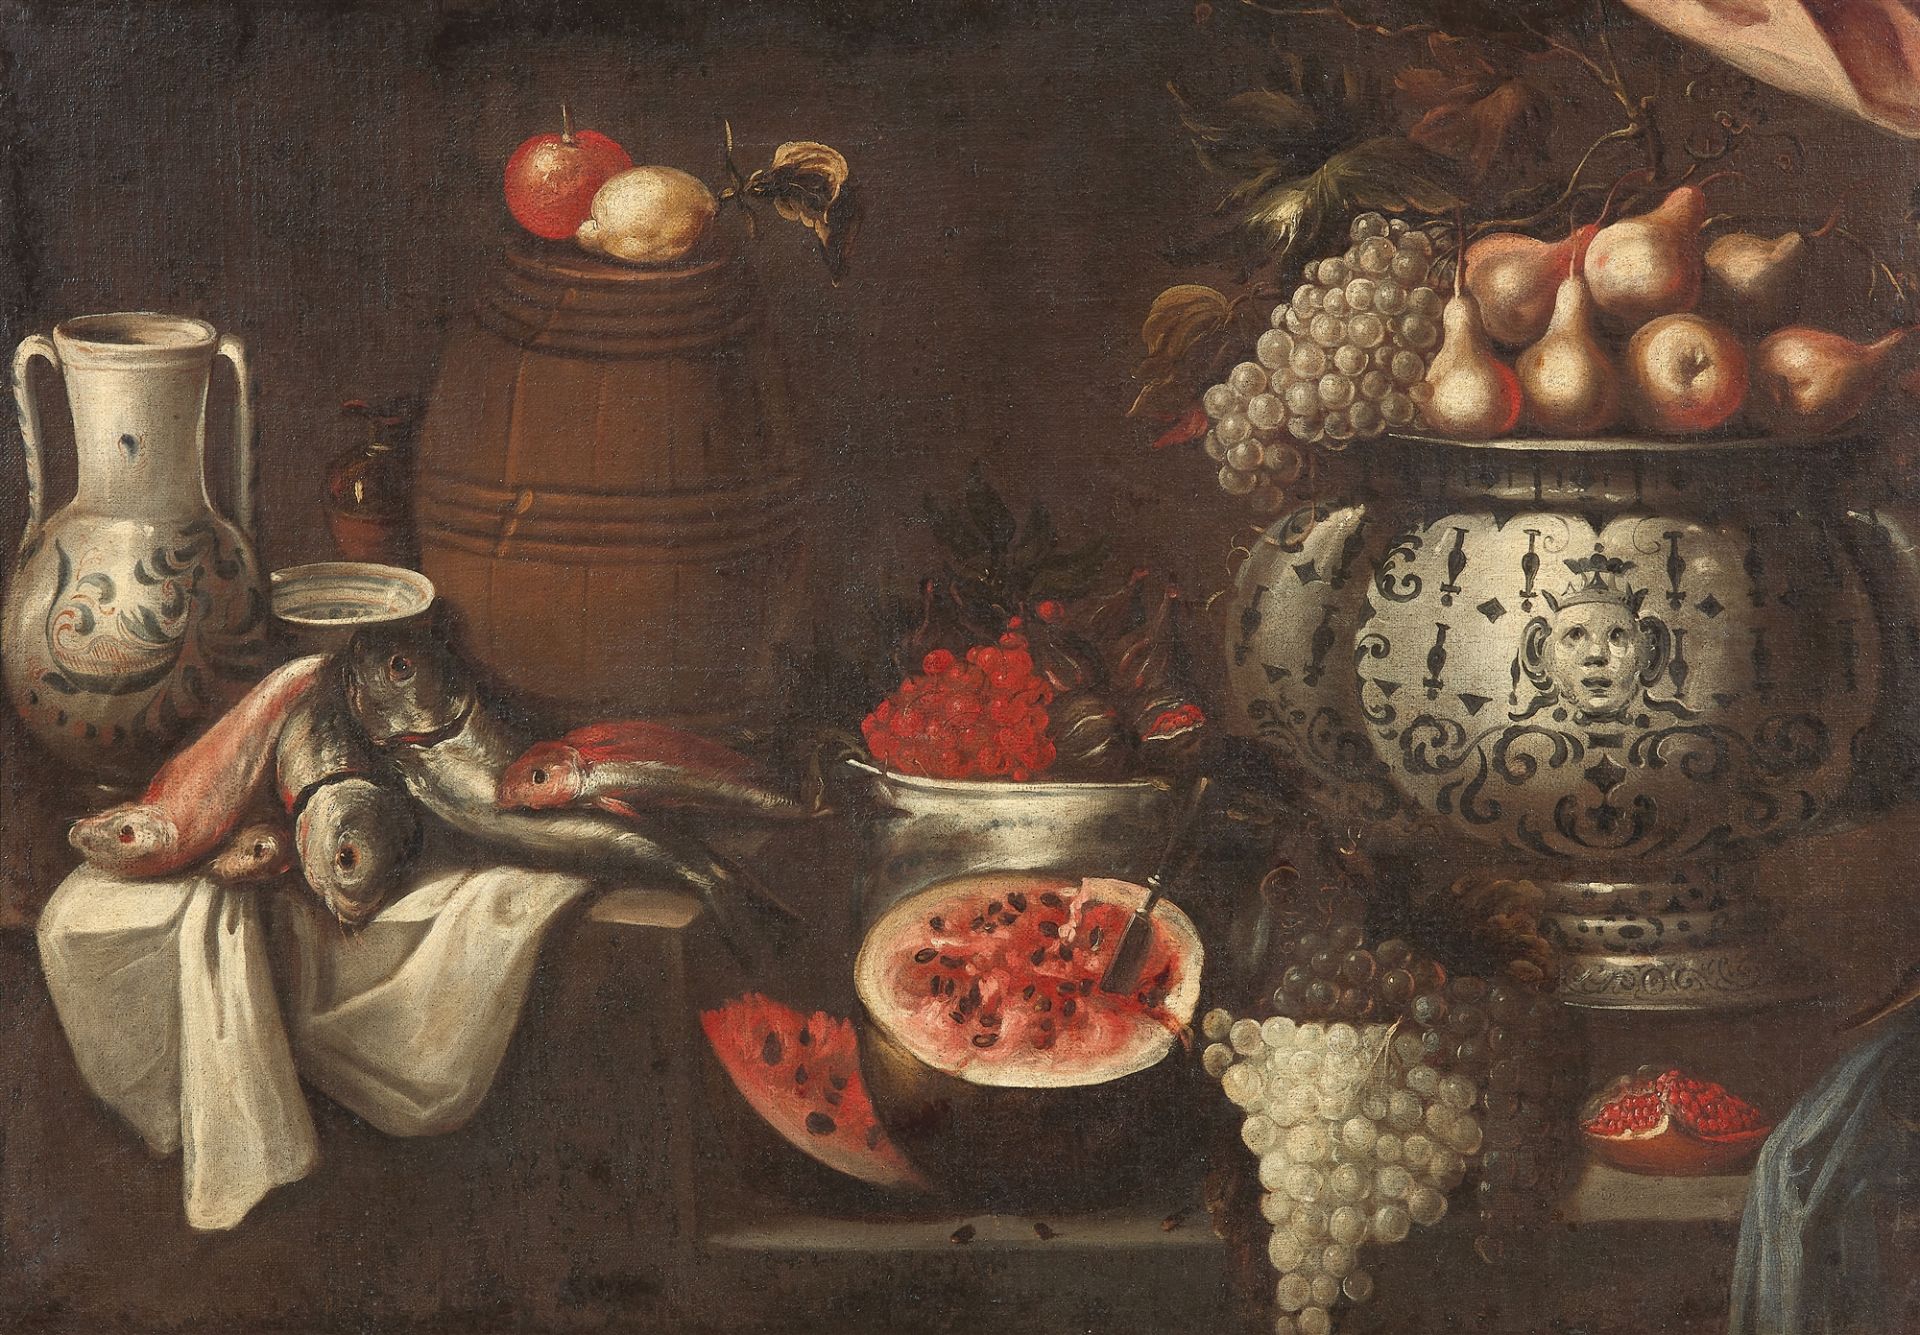 Spanish School 17th Century, Still life with Fruit, Ceramic Vessels and a Small Wooden Barrel